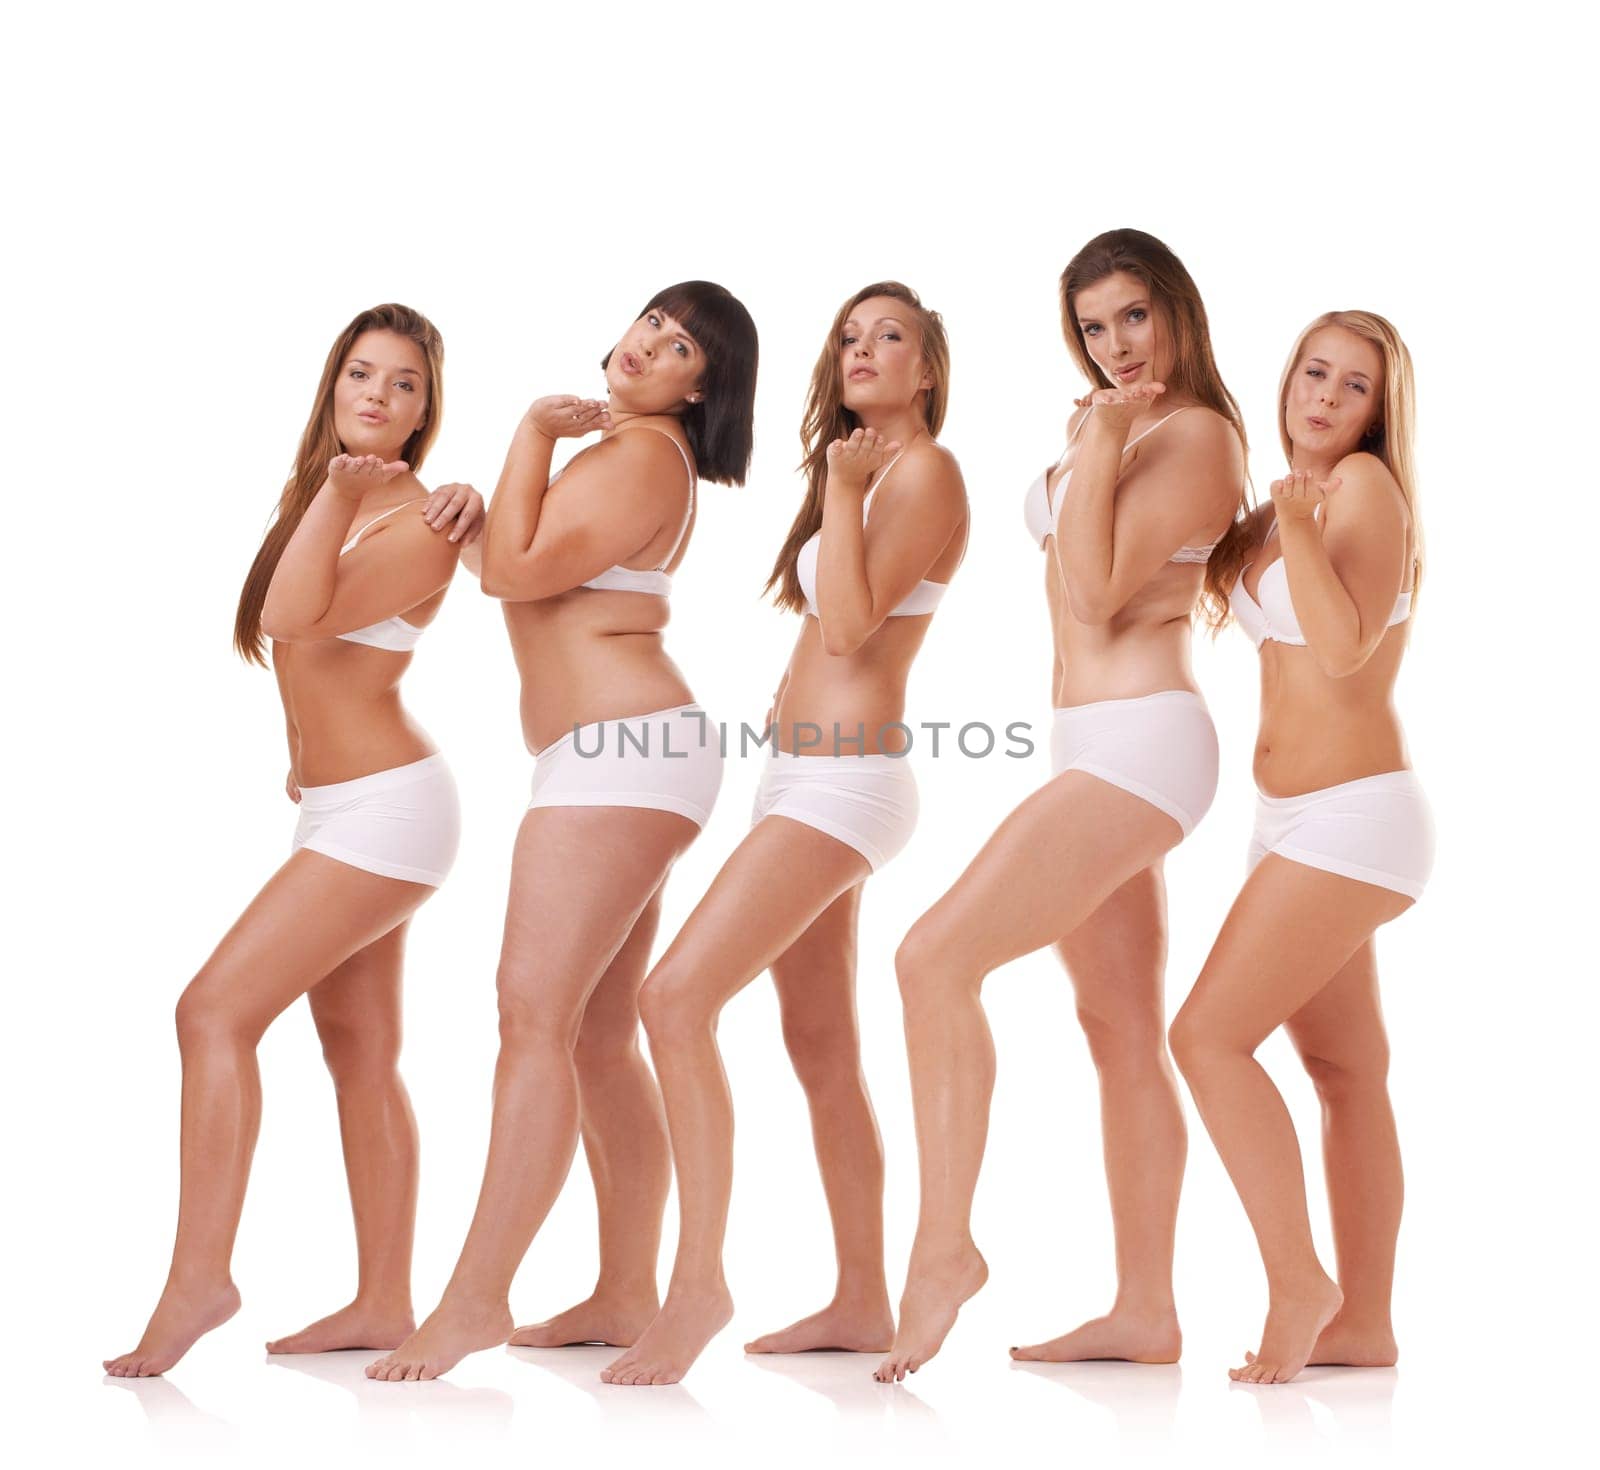 Mwah. Portrait, beauty and underwear with natural women in studio isolated on white background for wellness. Skincare, plus size and blow a kiss with model group together for body positive support